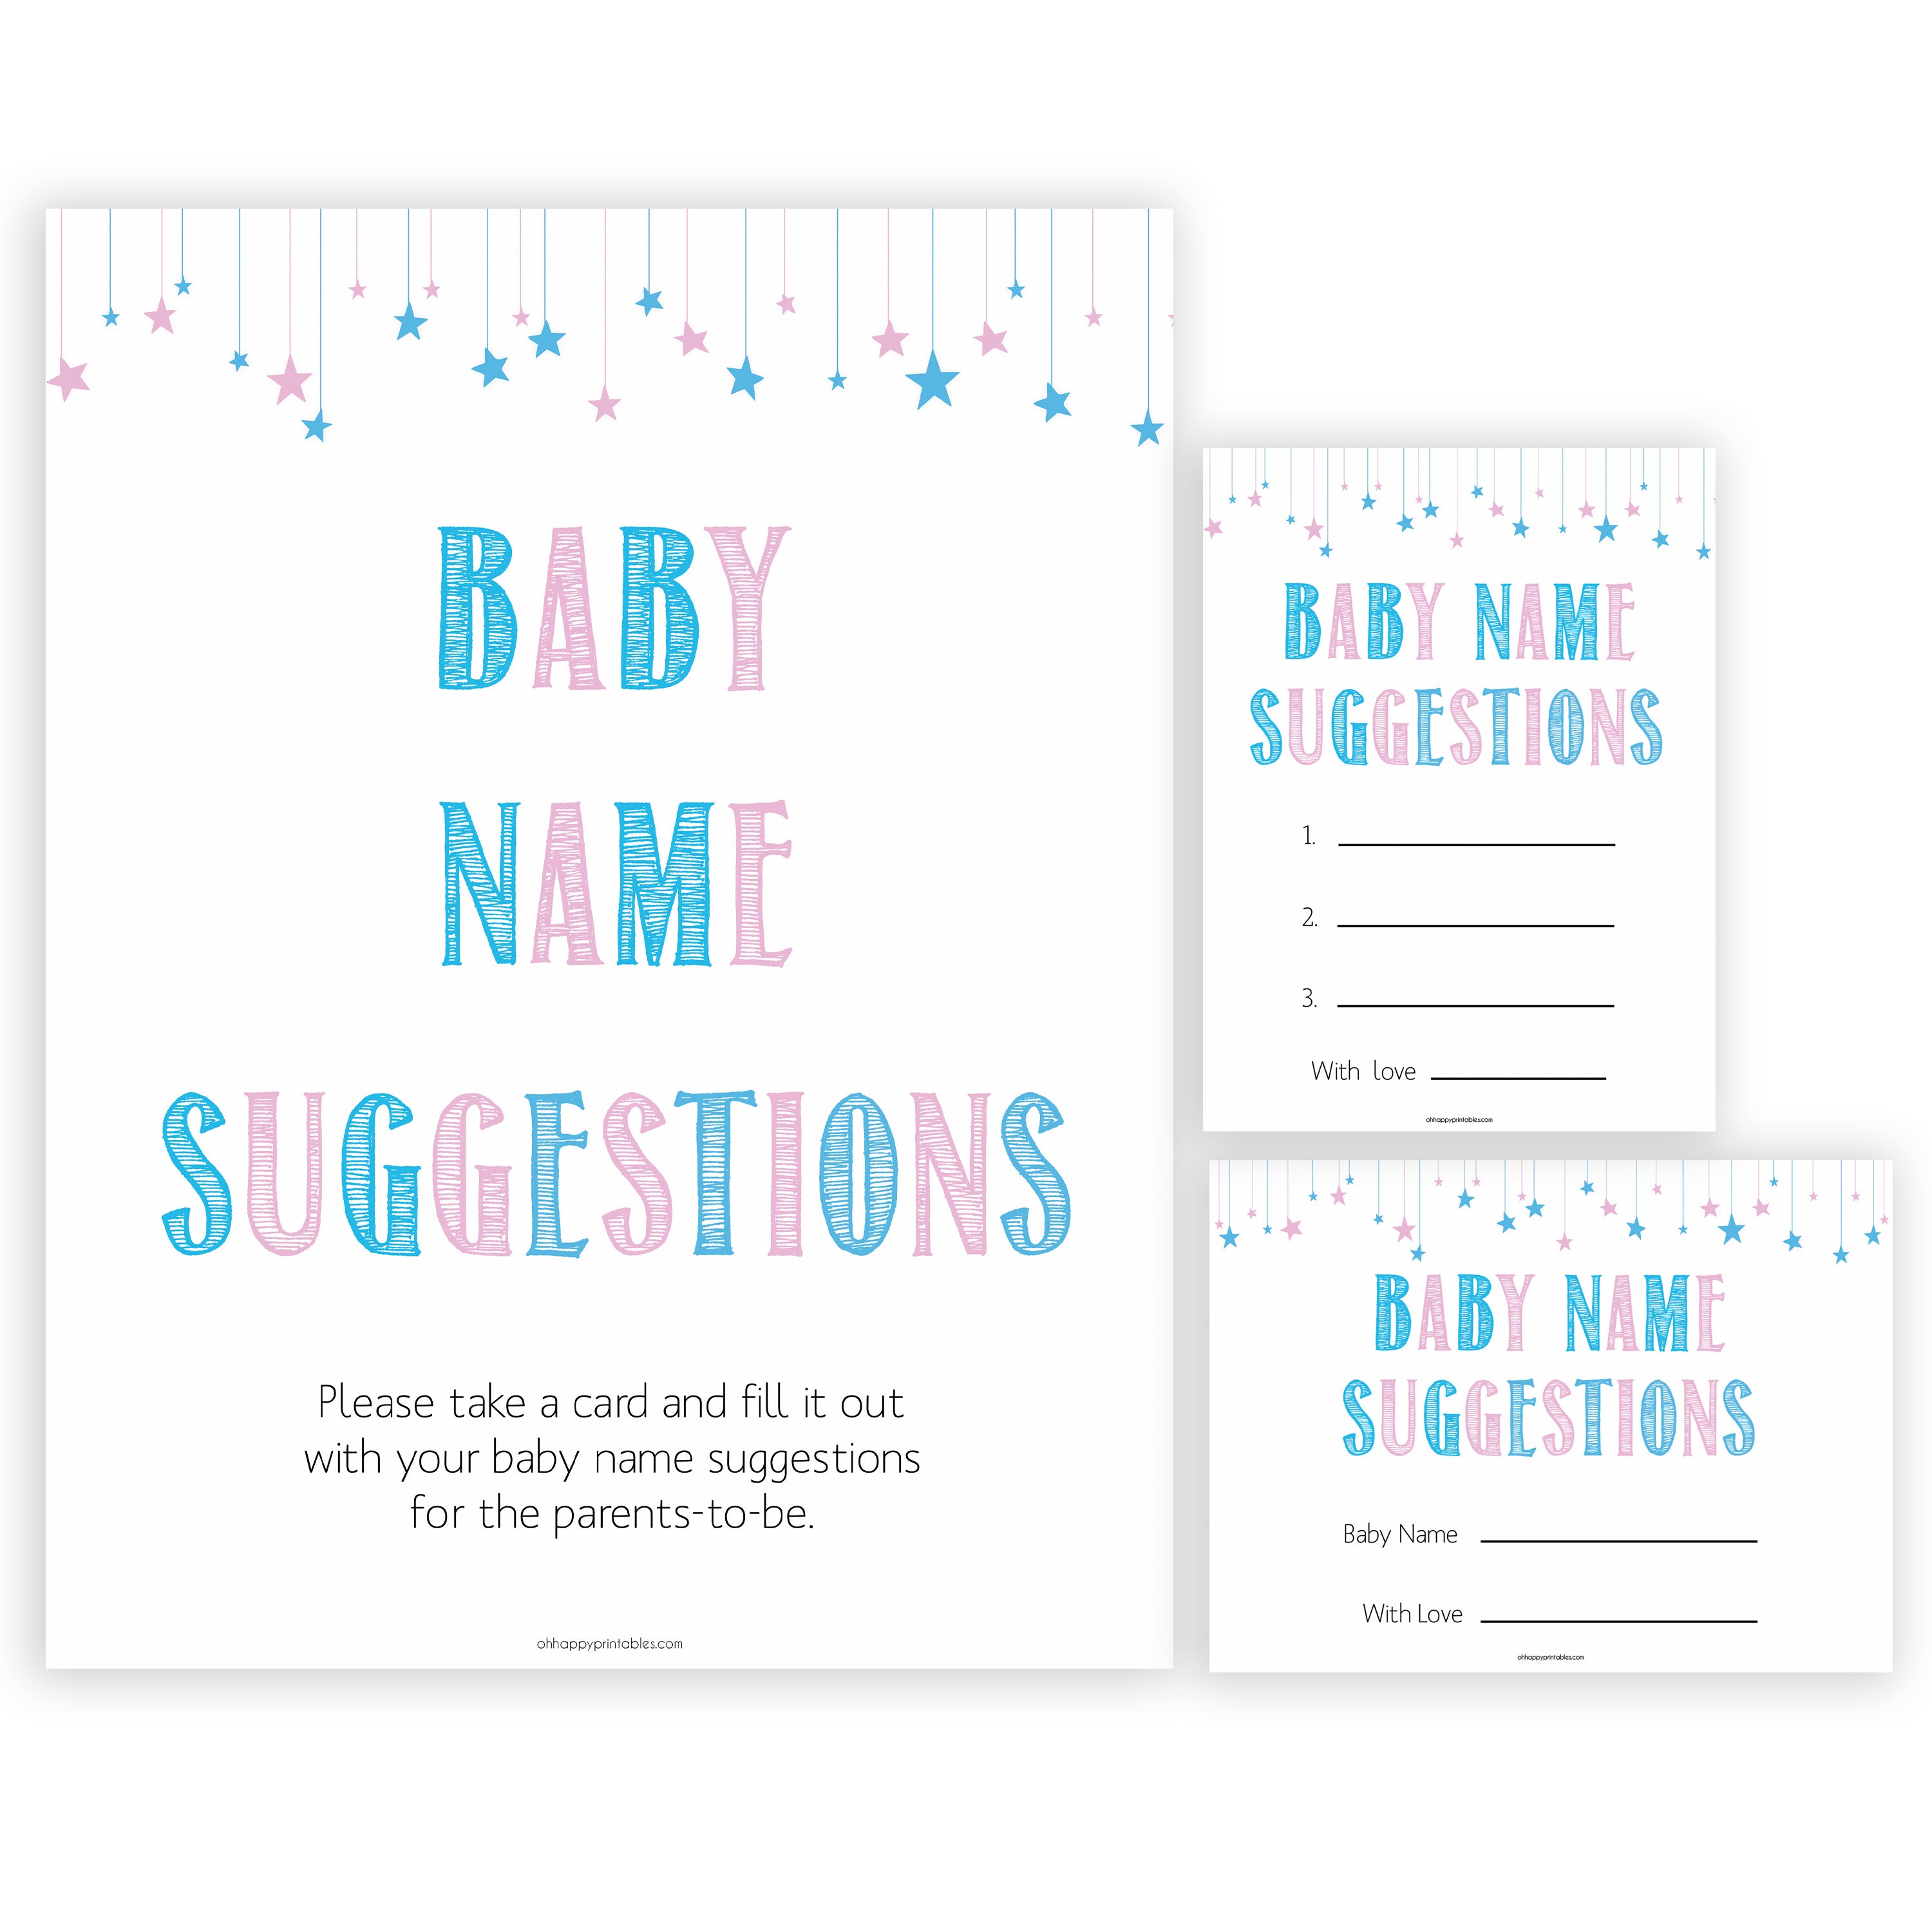 Gender reveal baby games, baby name suggestions baby game, gender reveal shower, fun baby games, gender reveal ideas, popular baby games, best baby games, printable baby games, gender reveal baby games